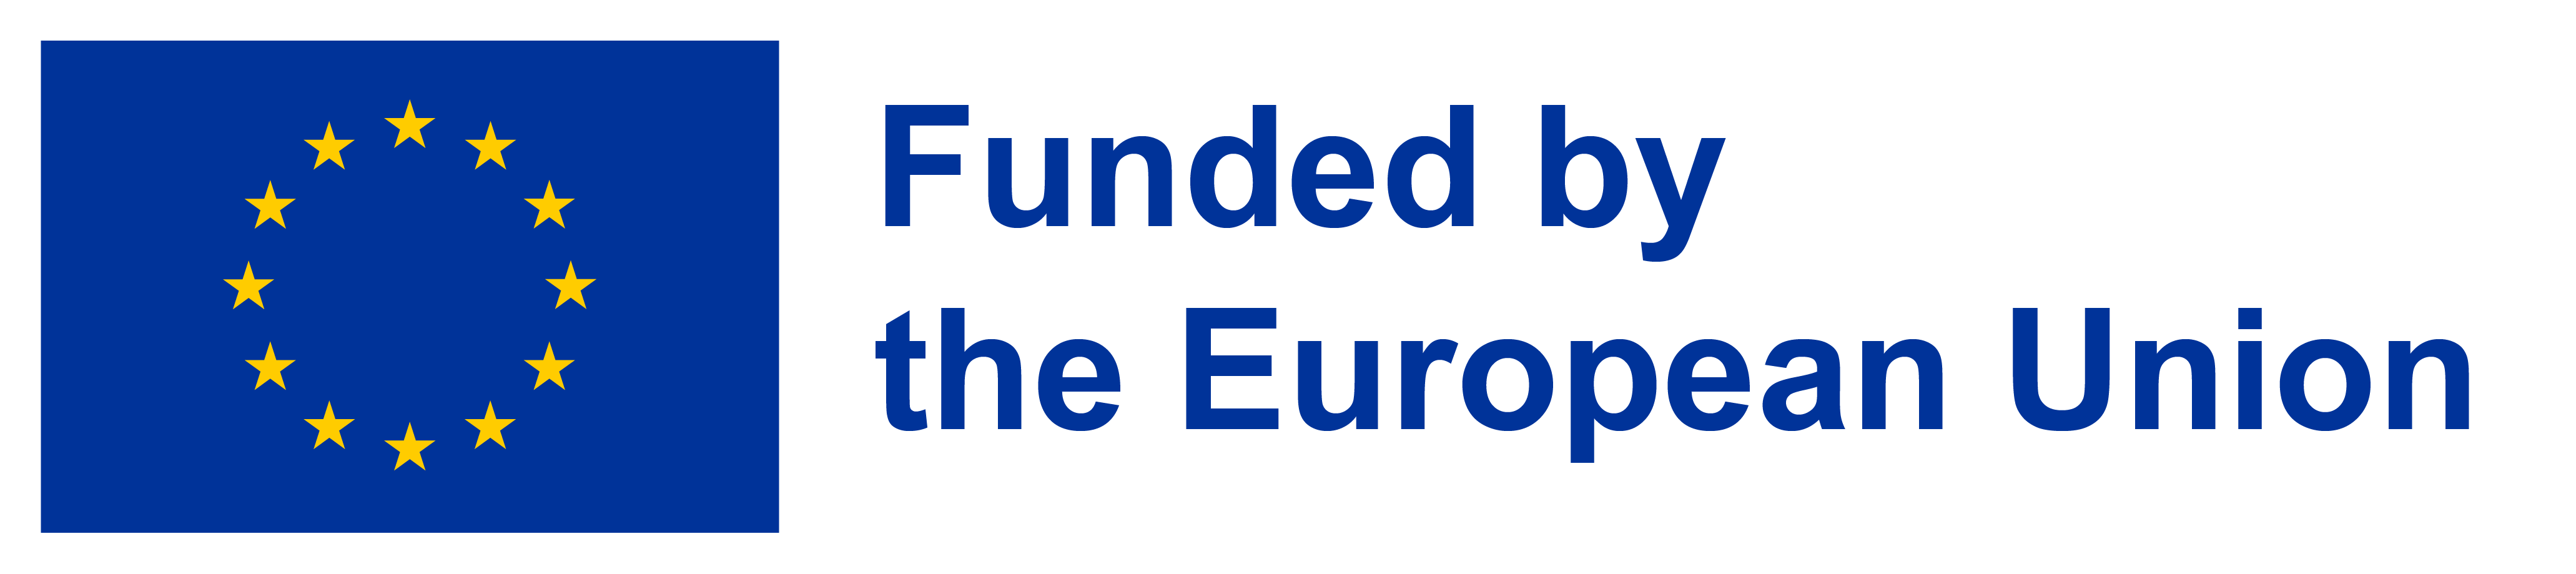 Founded by the EU